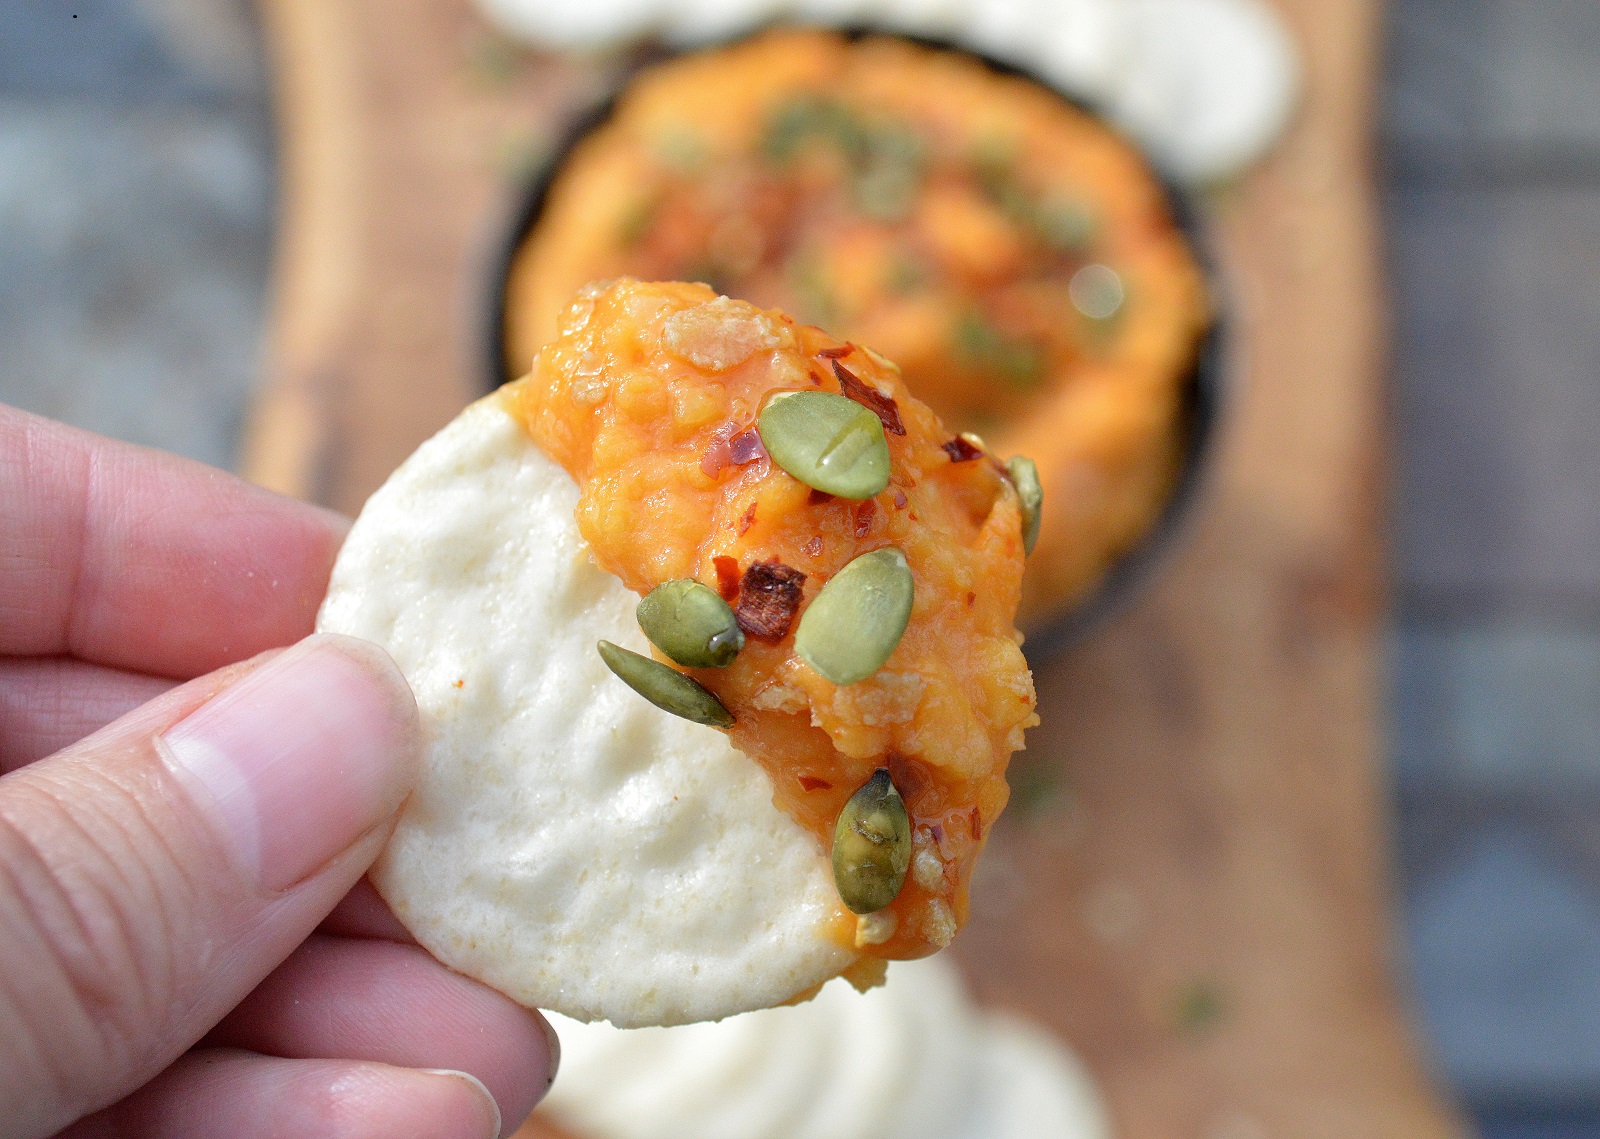 Sweet Potato Hummus is delicious, easy and good for you too!